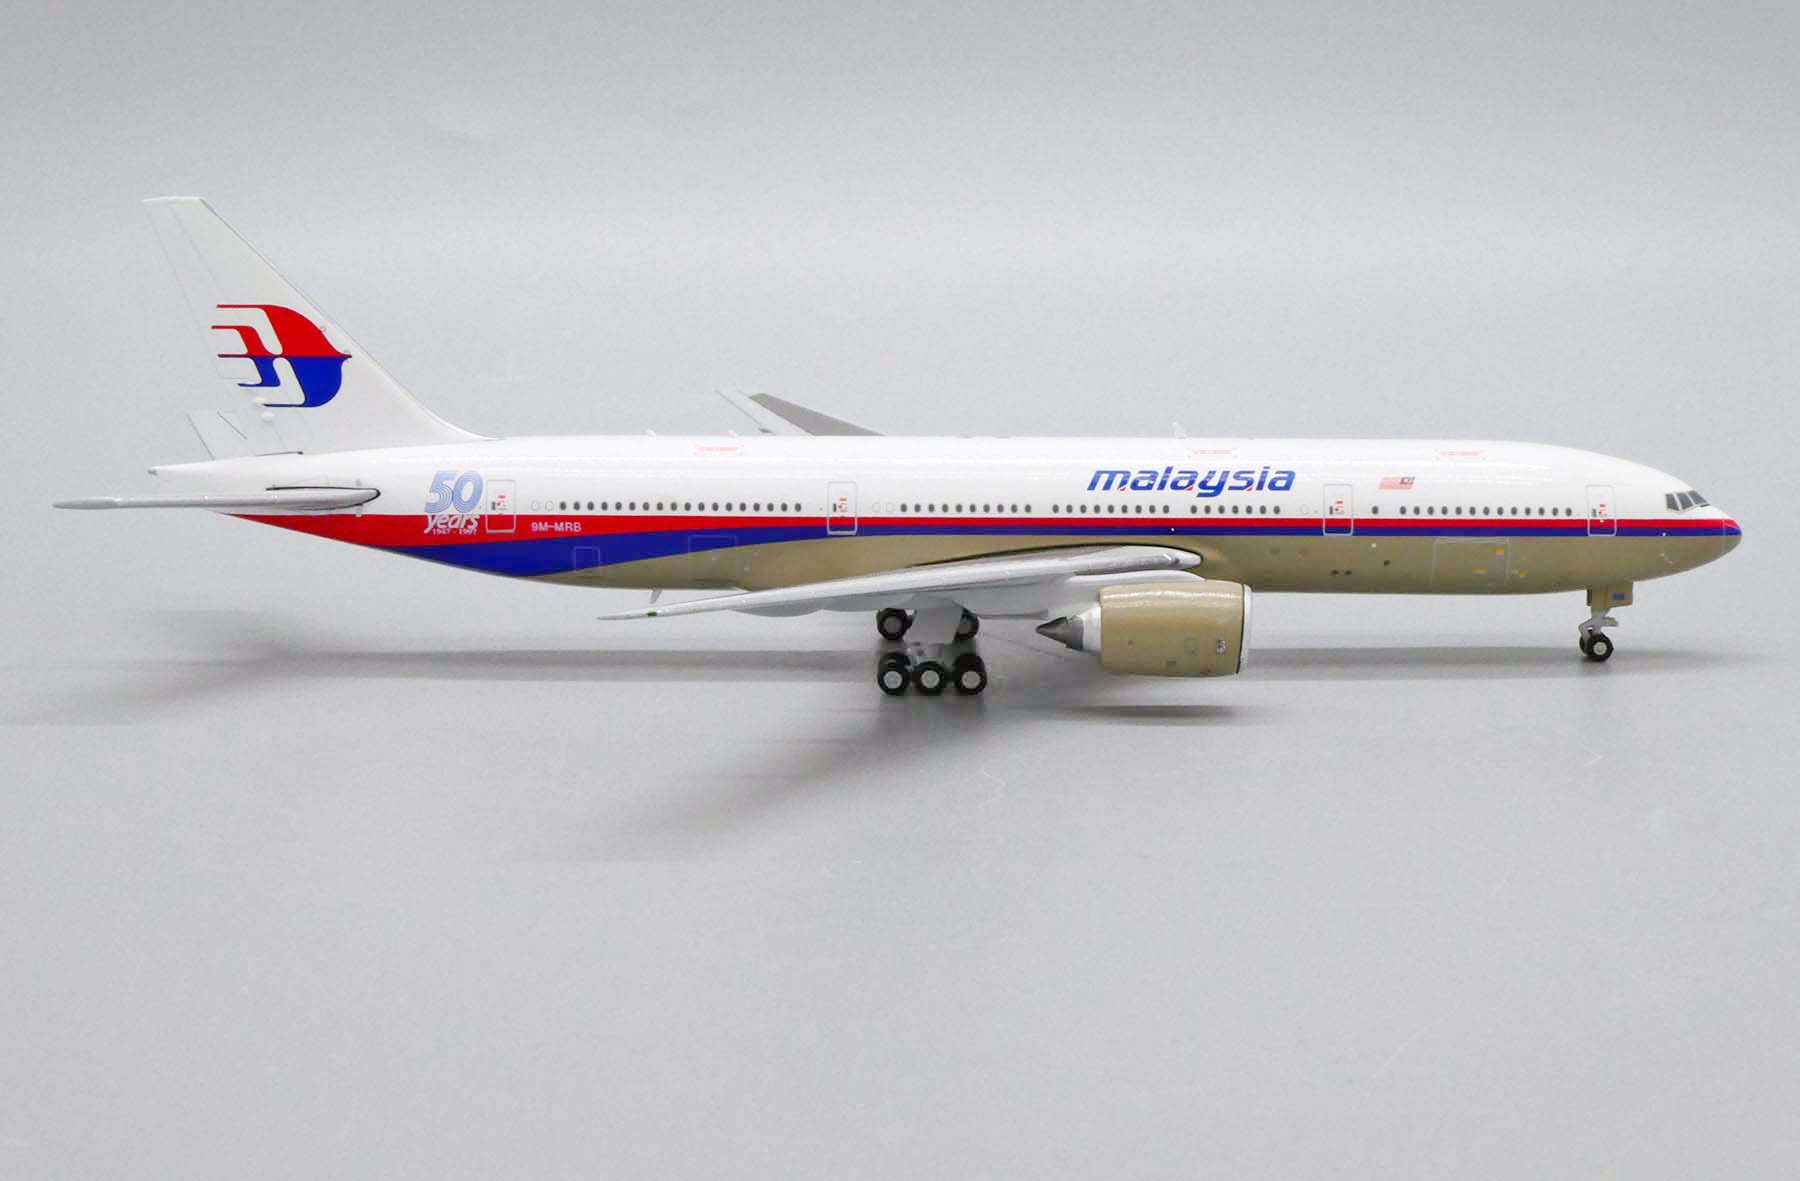 ScaleModelStore.com :: JC Wings 1:400 - XX4488 - Malaysia Airlines ...